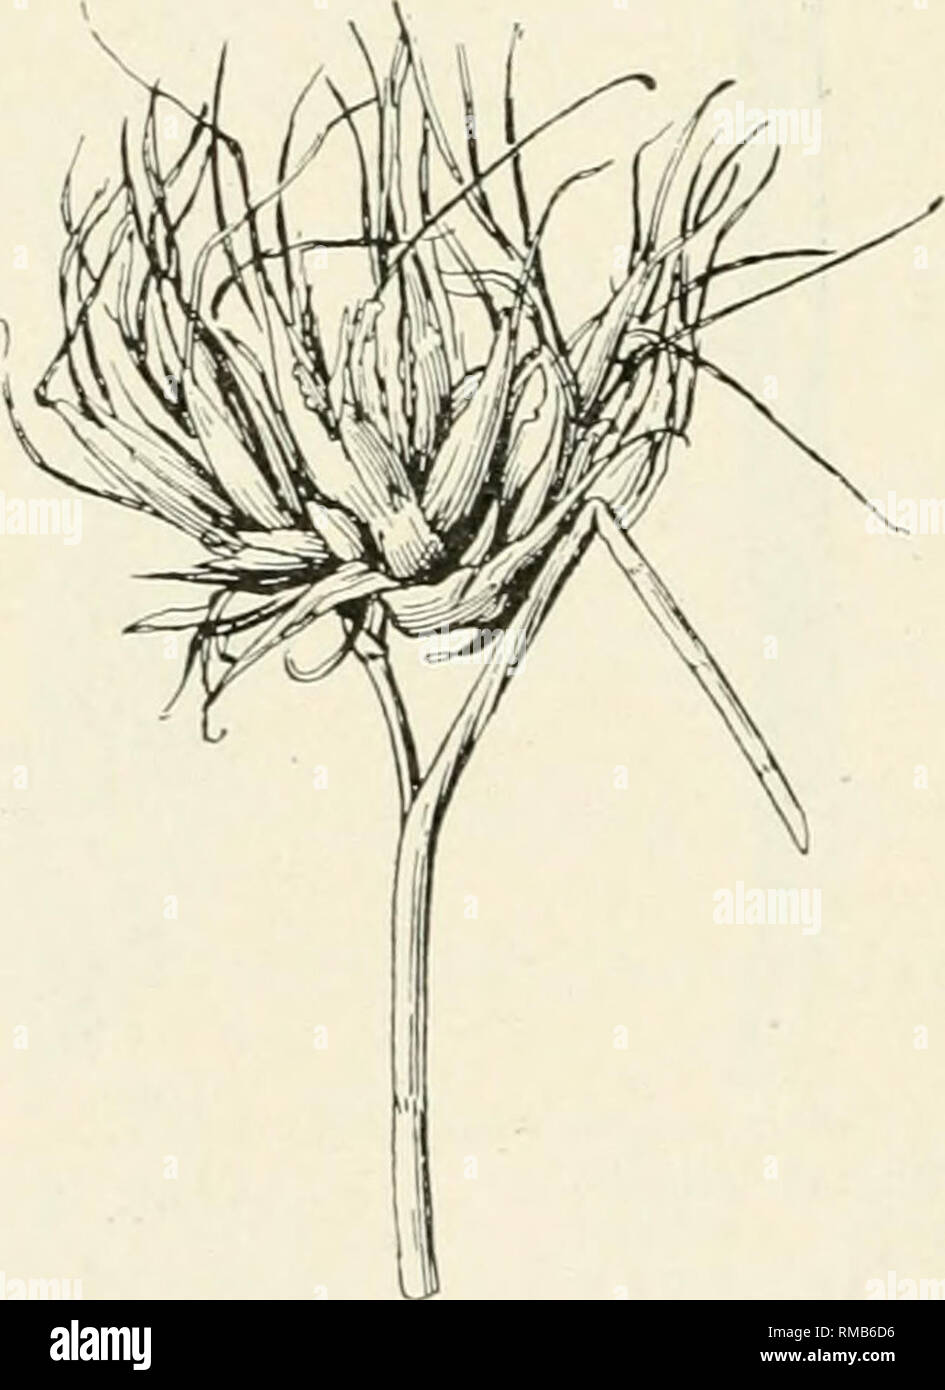 . Annual report. New York State Museum; Science -- New York (State); Plants -- New York (State); Animals -- New York (State). 24 NEW YORK STATE MUSEUM Aristida (triple-awned grass) Fasciated, reduced leaves, fruit aborted (Bethel in litt.) Banks, '05, p. 140. Fig. 19. Acarid. Siteroptes carnea Bks. Muhlenbergia Fusiform stem enlargement. Fig. 20. Marten '93, p. 155 Itonid. Asteromyia agrostis O. S. Fusiform stem enlargement, apparently an aborted Asteromyia agros- tis gall. Dipt. Chlorops ingrata Will. Orange-colored larvae at the base of the leaf sheath and associated with localized, dead are Stock Photo